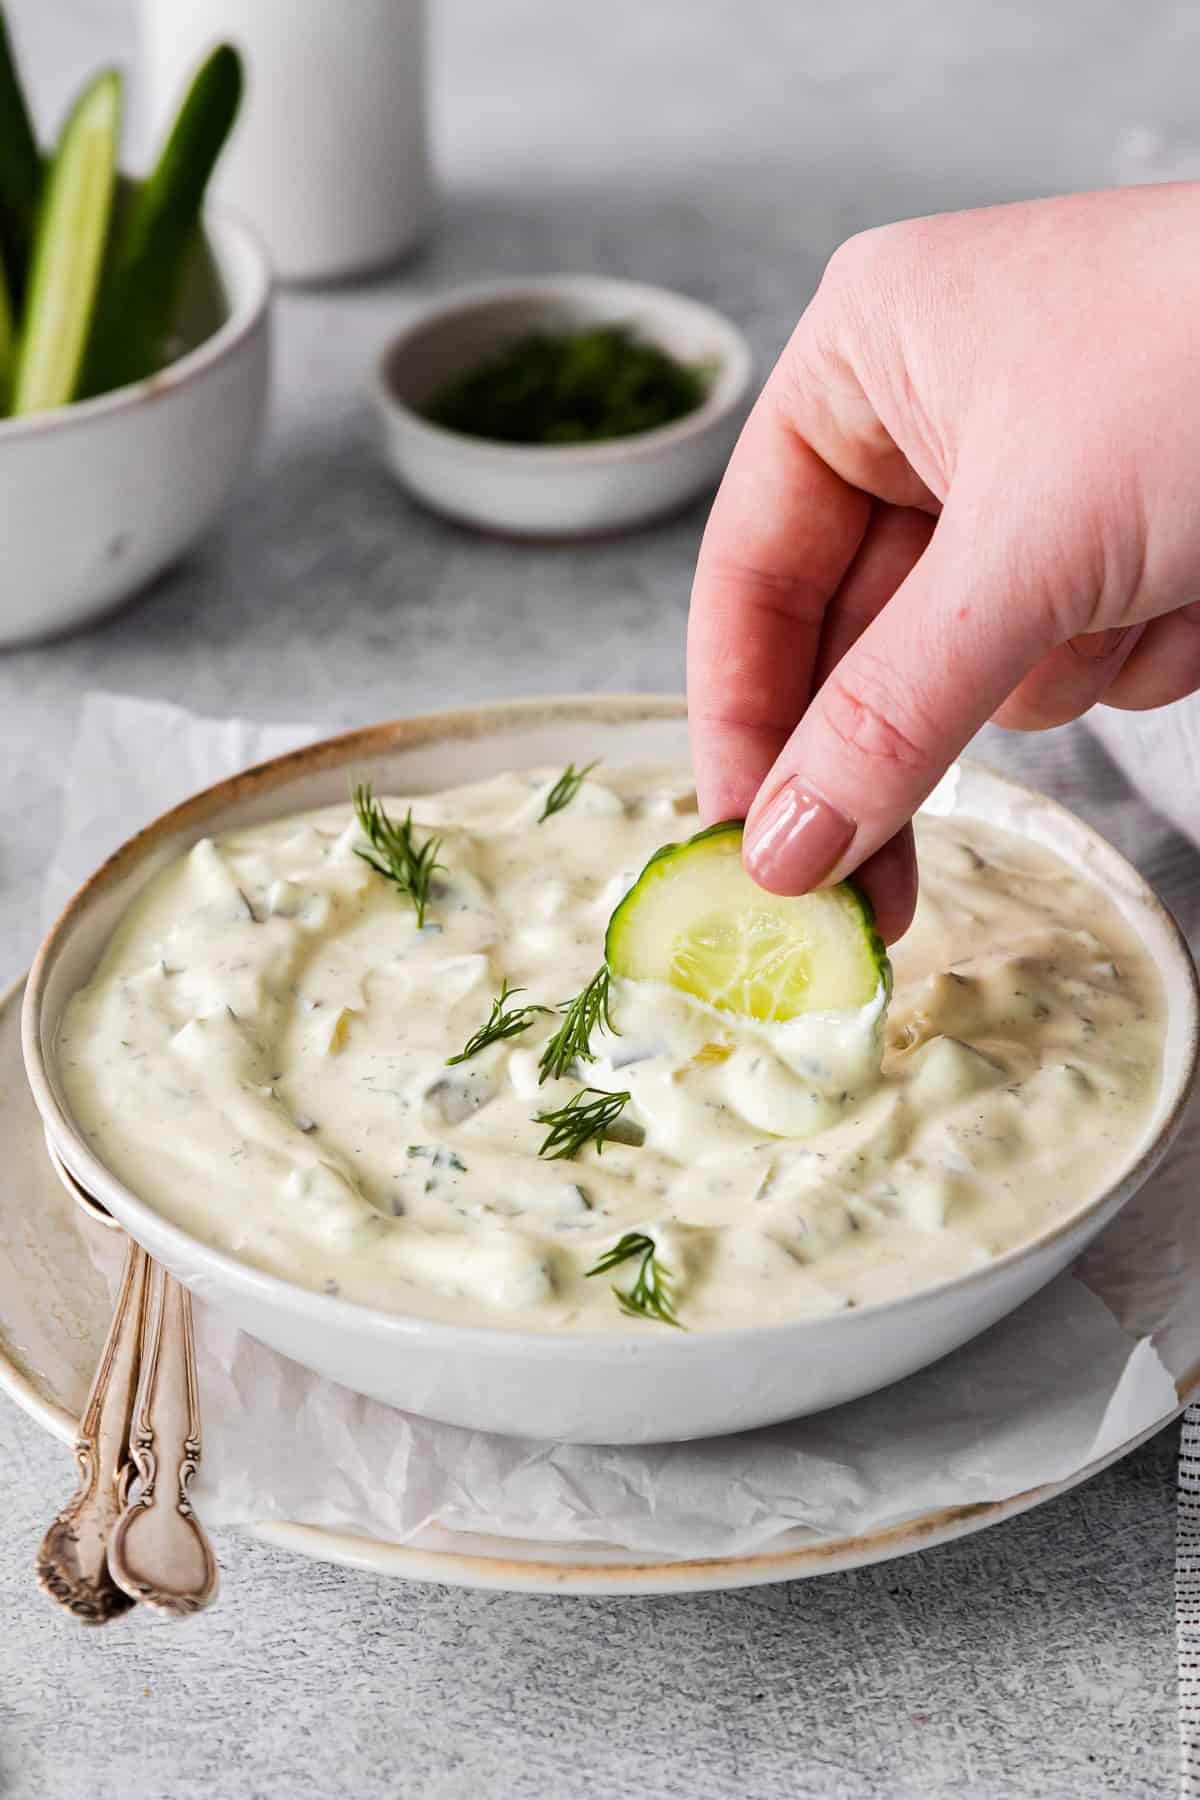 hand dipping a slice of cucumber into dip